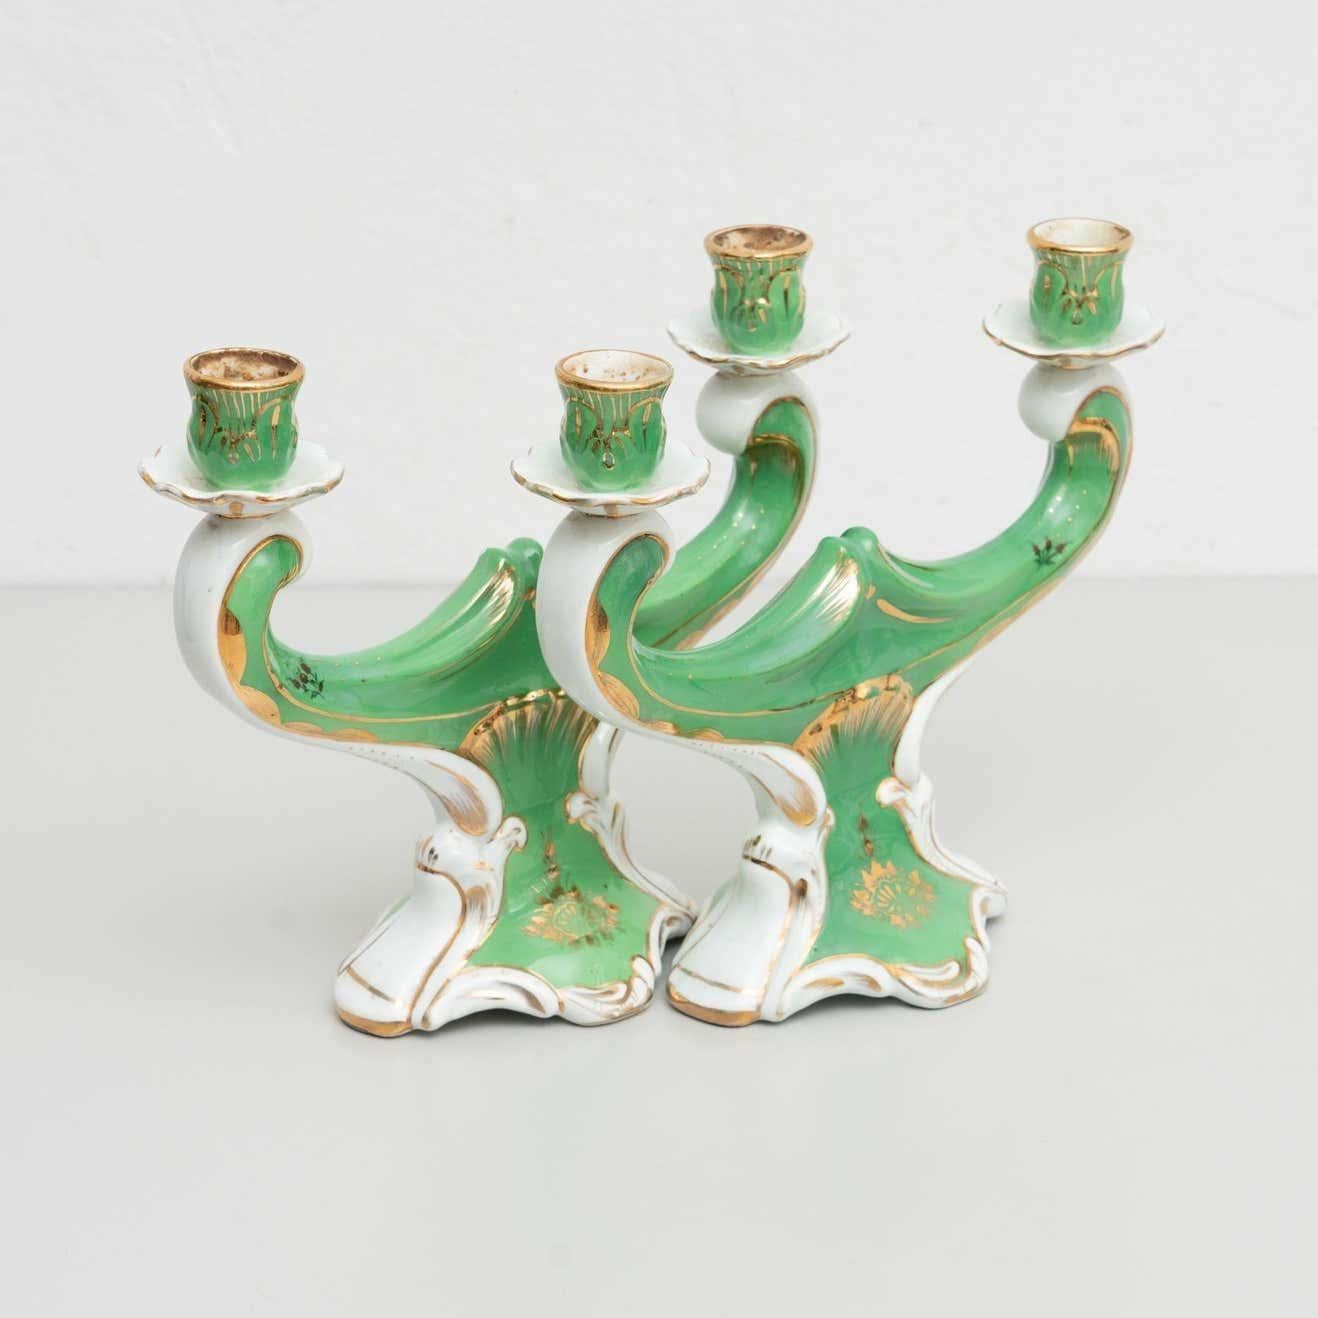 Set of 2 Hand Painted Ceramic Candle Holders, circa 1930 For Sale 1